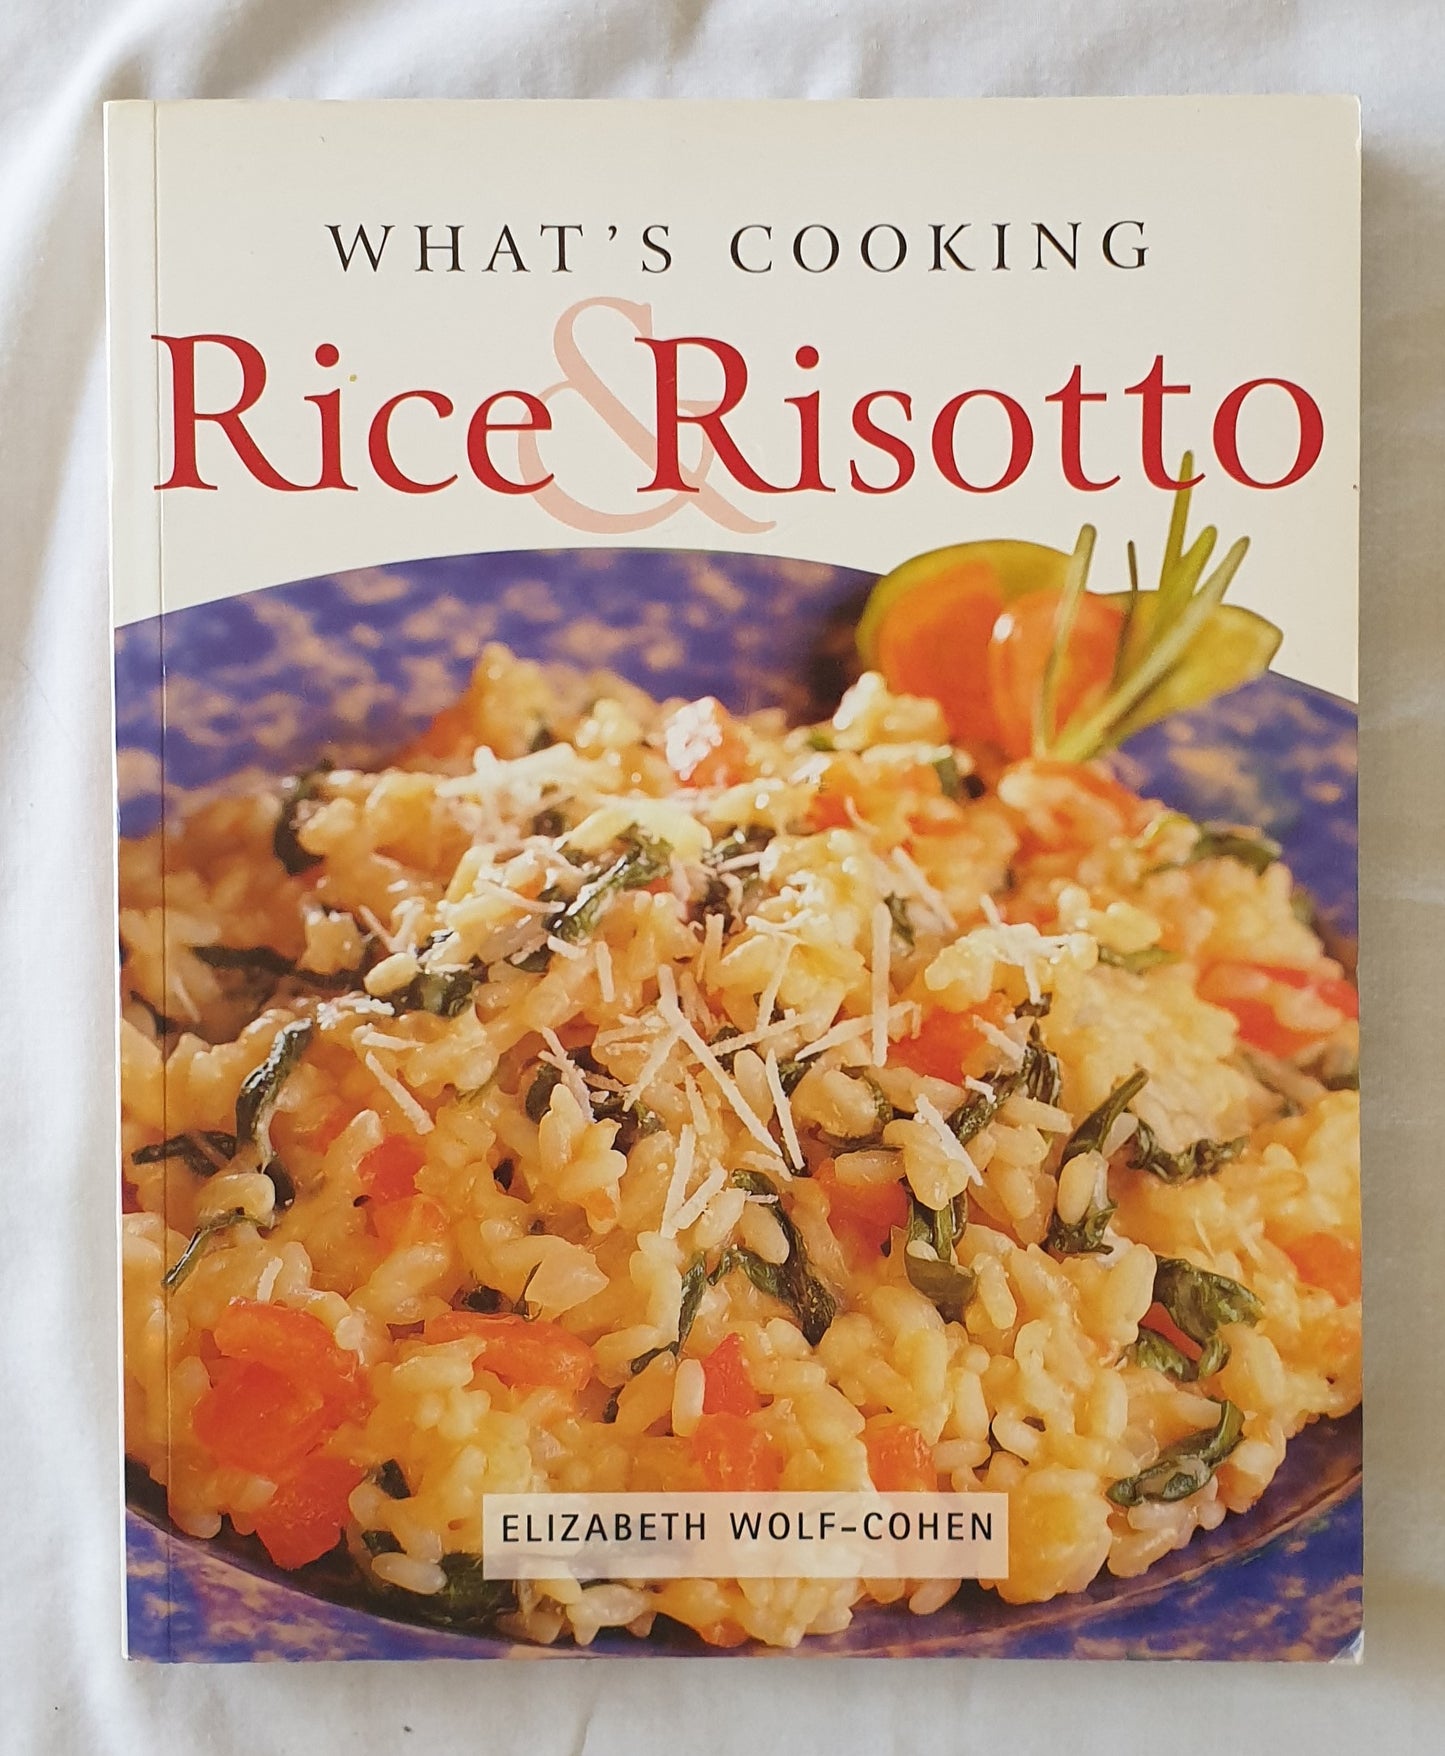 What’s Cooking Rice & Risotto by Elizabeth Wolf-Cohen